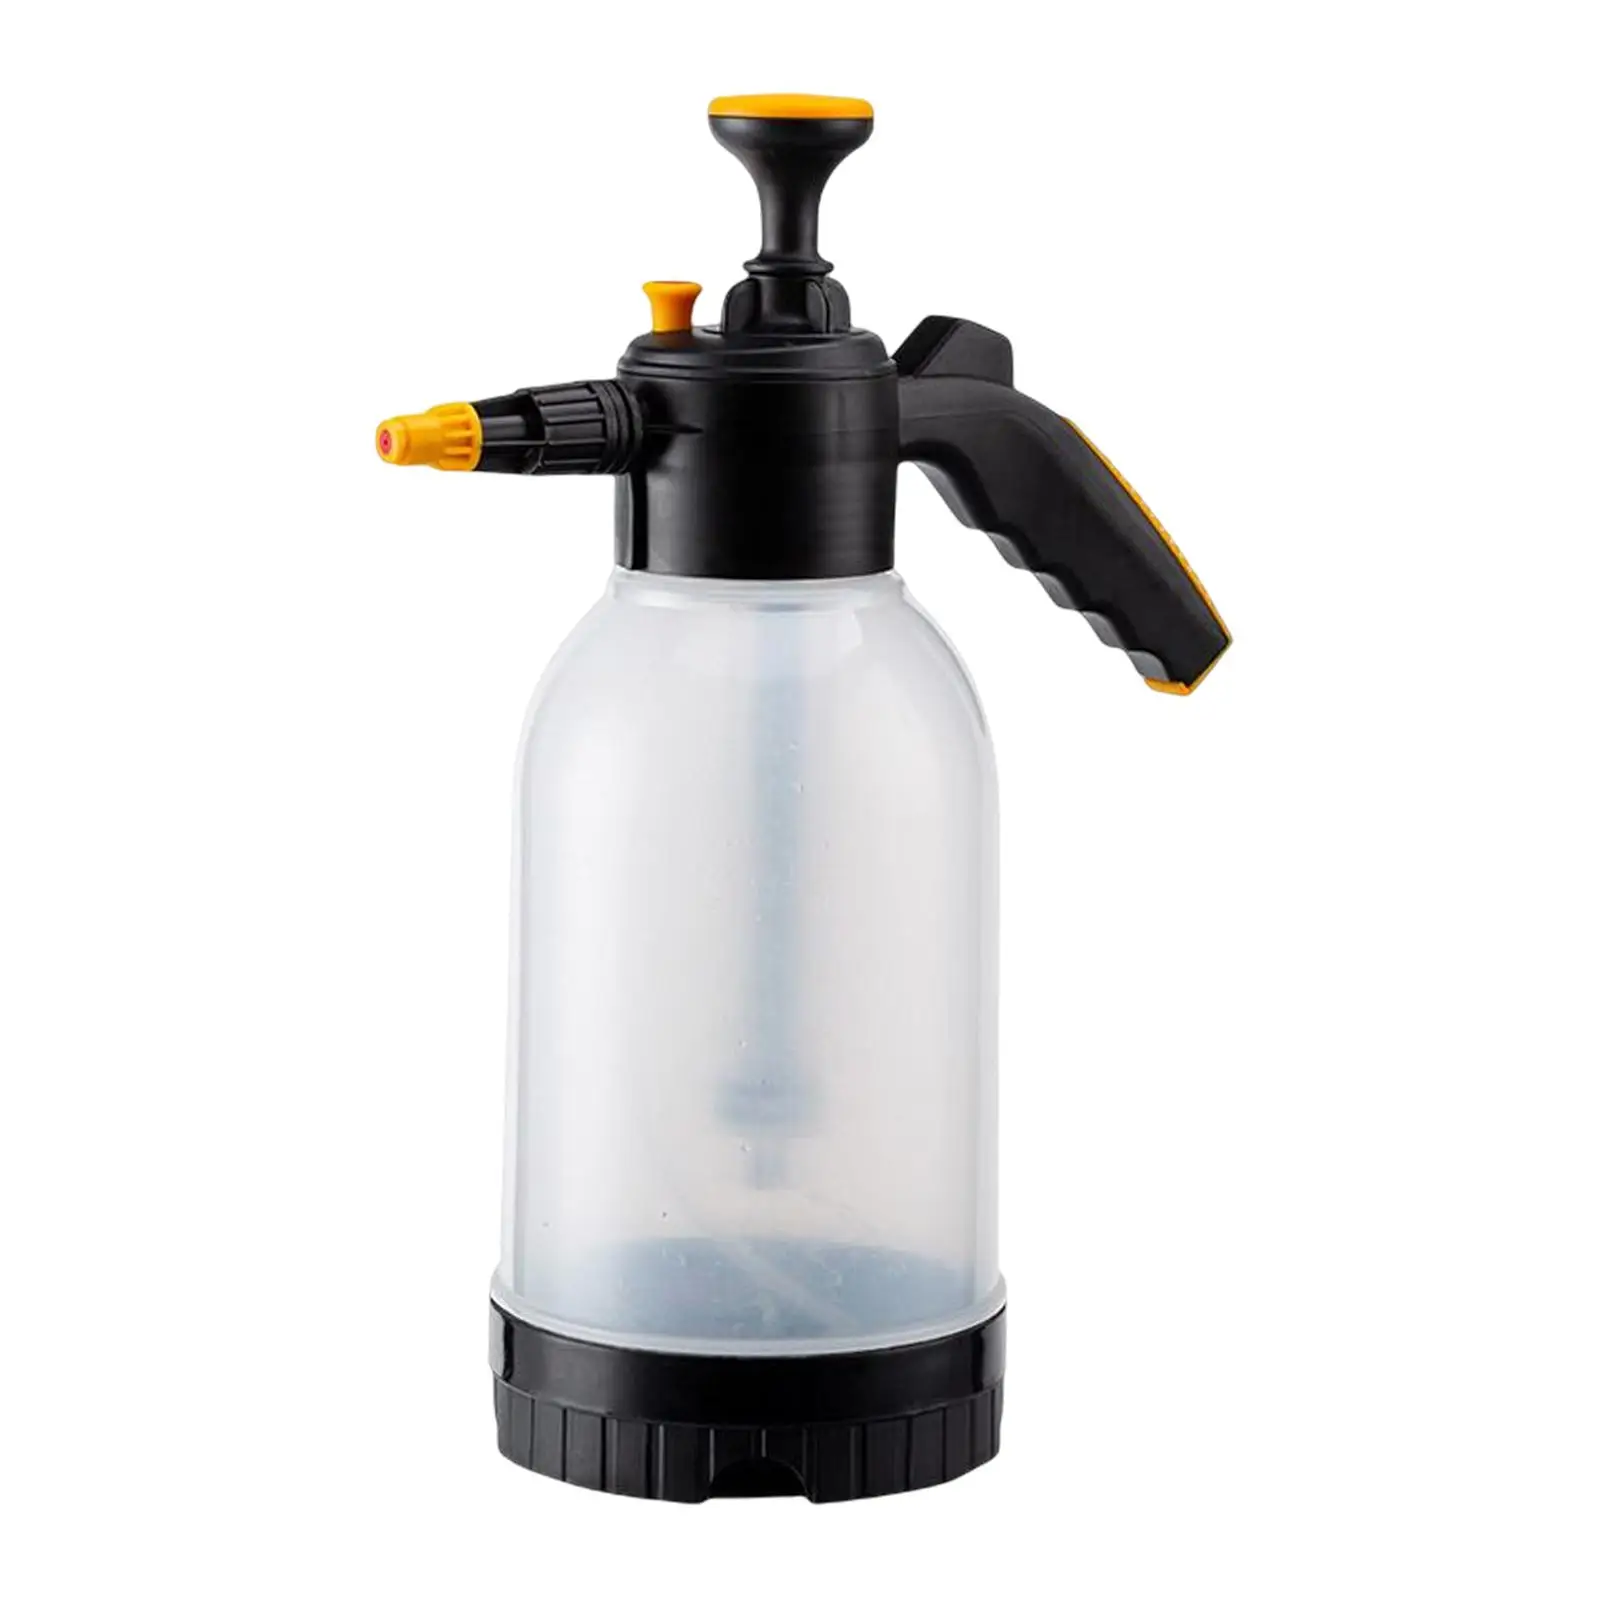 Durable Handheld Foam Sprayer Equipment Bottle Convenient Pressure Pump for House Cleaning Lawn Window Cleaning Car Wash